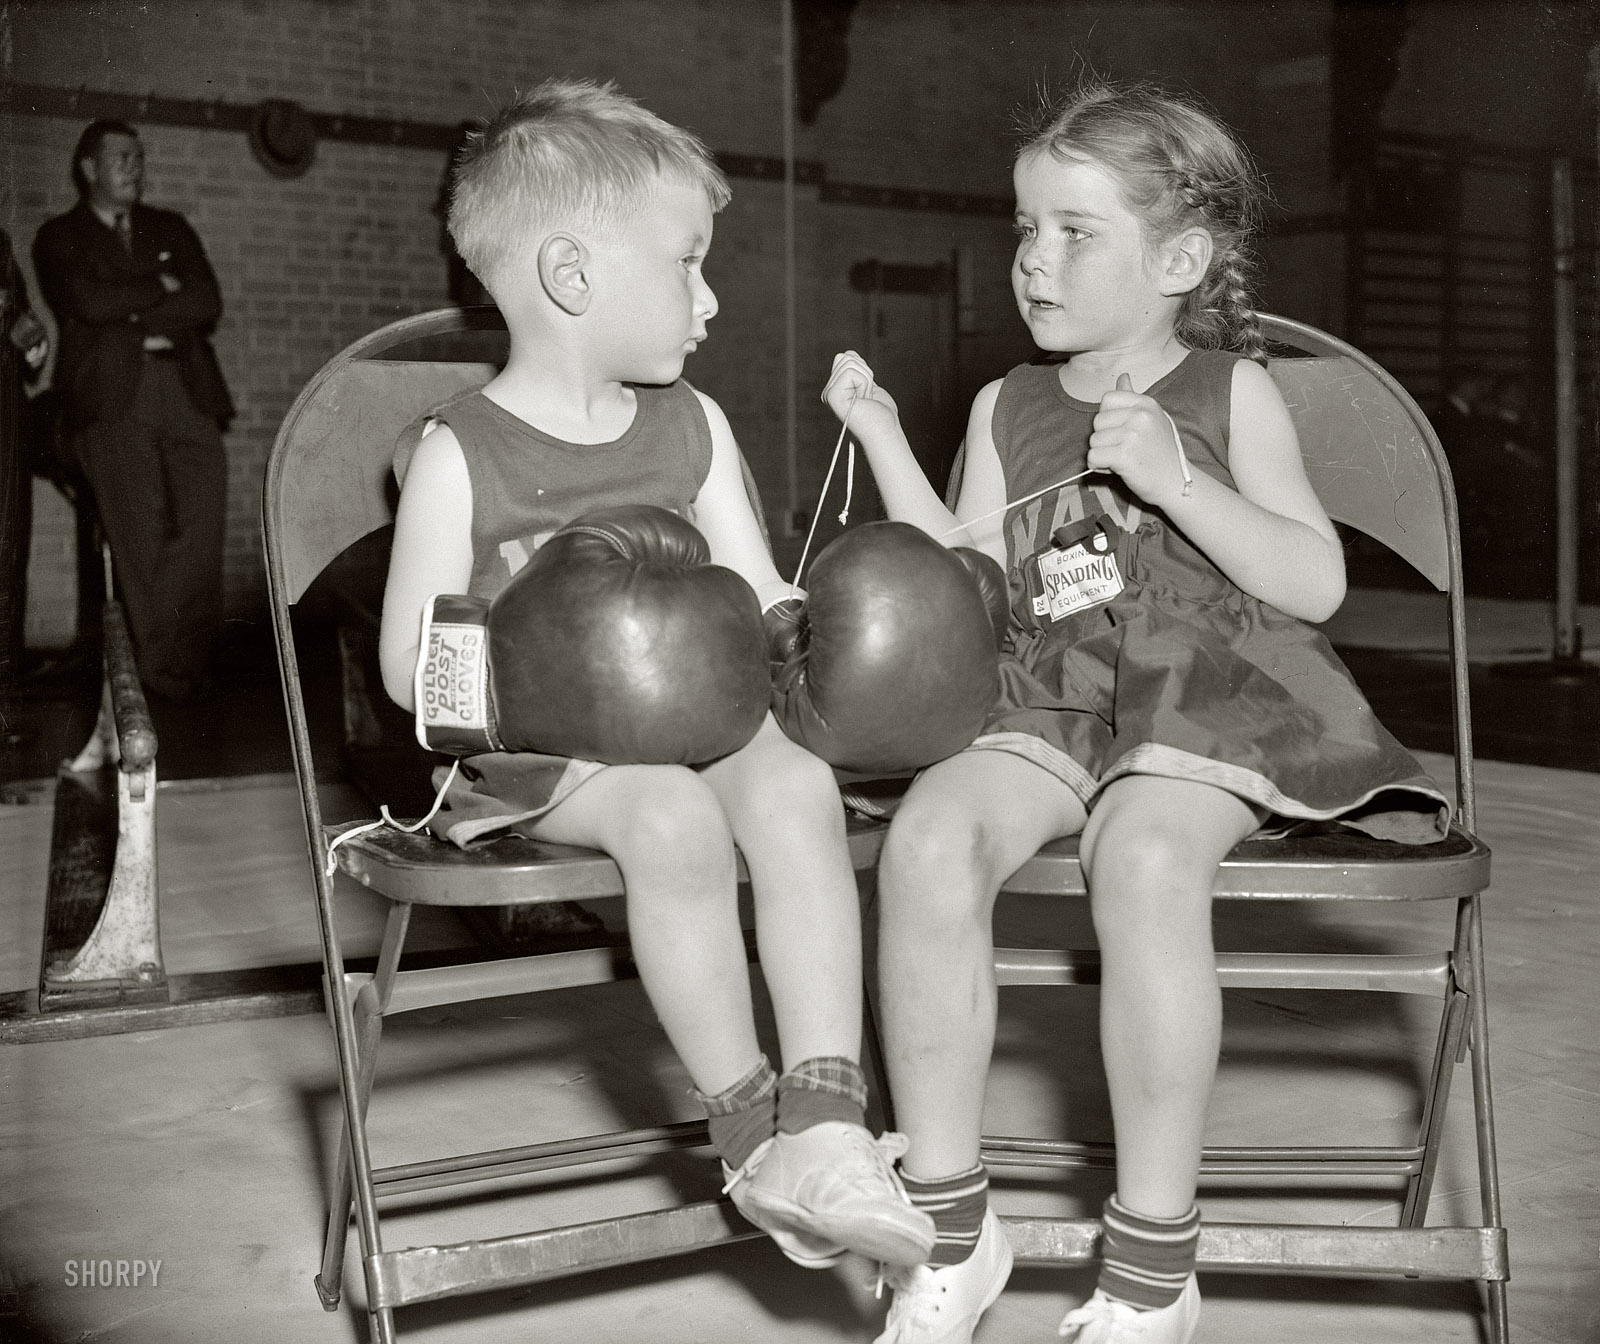 April 15, 1939. Annapolis, Maryland. "Dorothy Wood, 5, saw to it that her small friend, 'Chuck' Andrews, 3, wasn't being framed by some of the boys who hang around these places. She laced on his gloves herself. The occasion was the Naval Academy's 20th Annual Junior Boxing Championships." View full size.